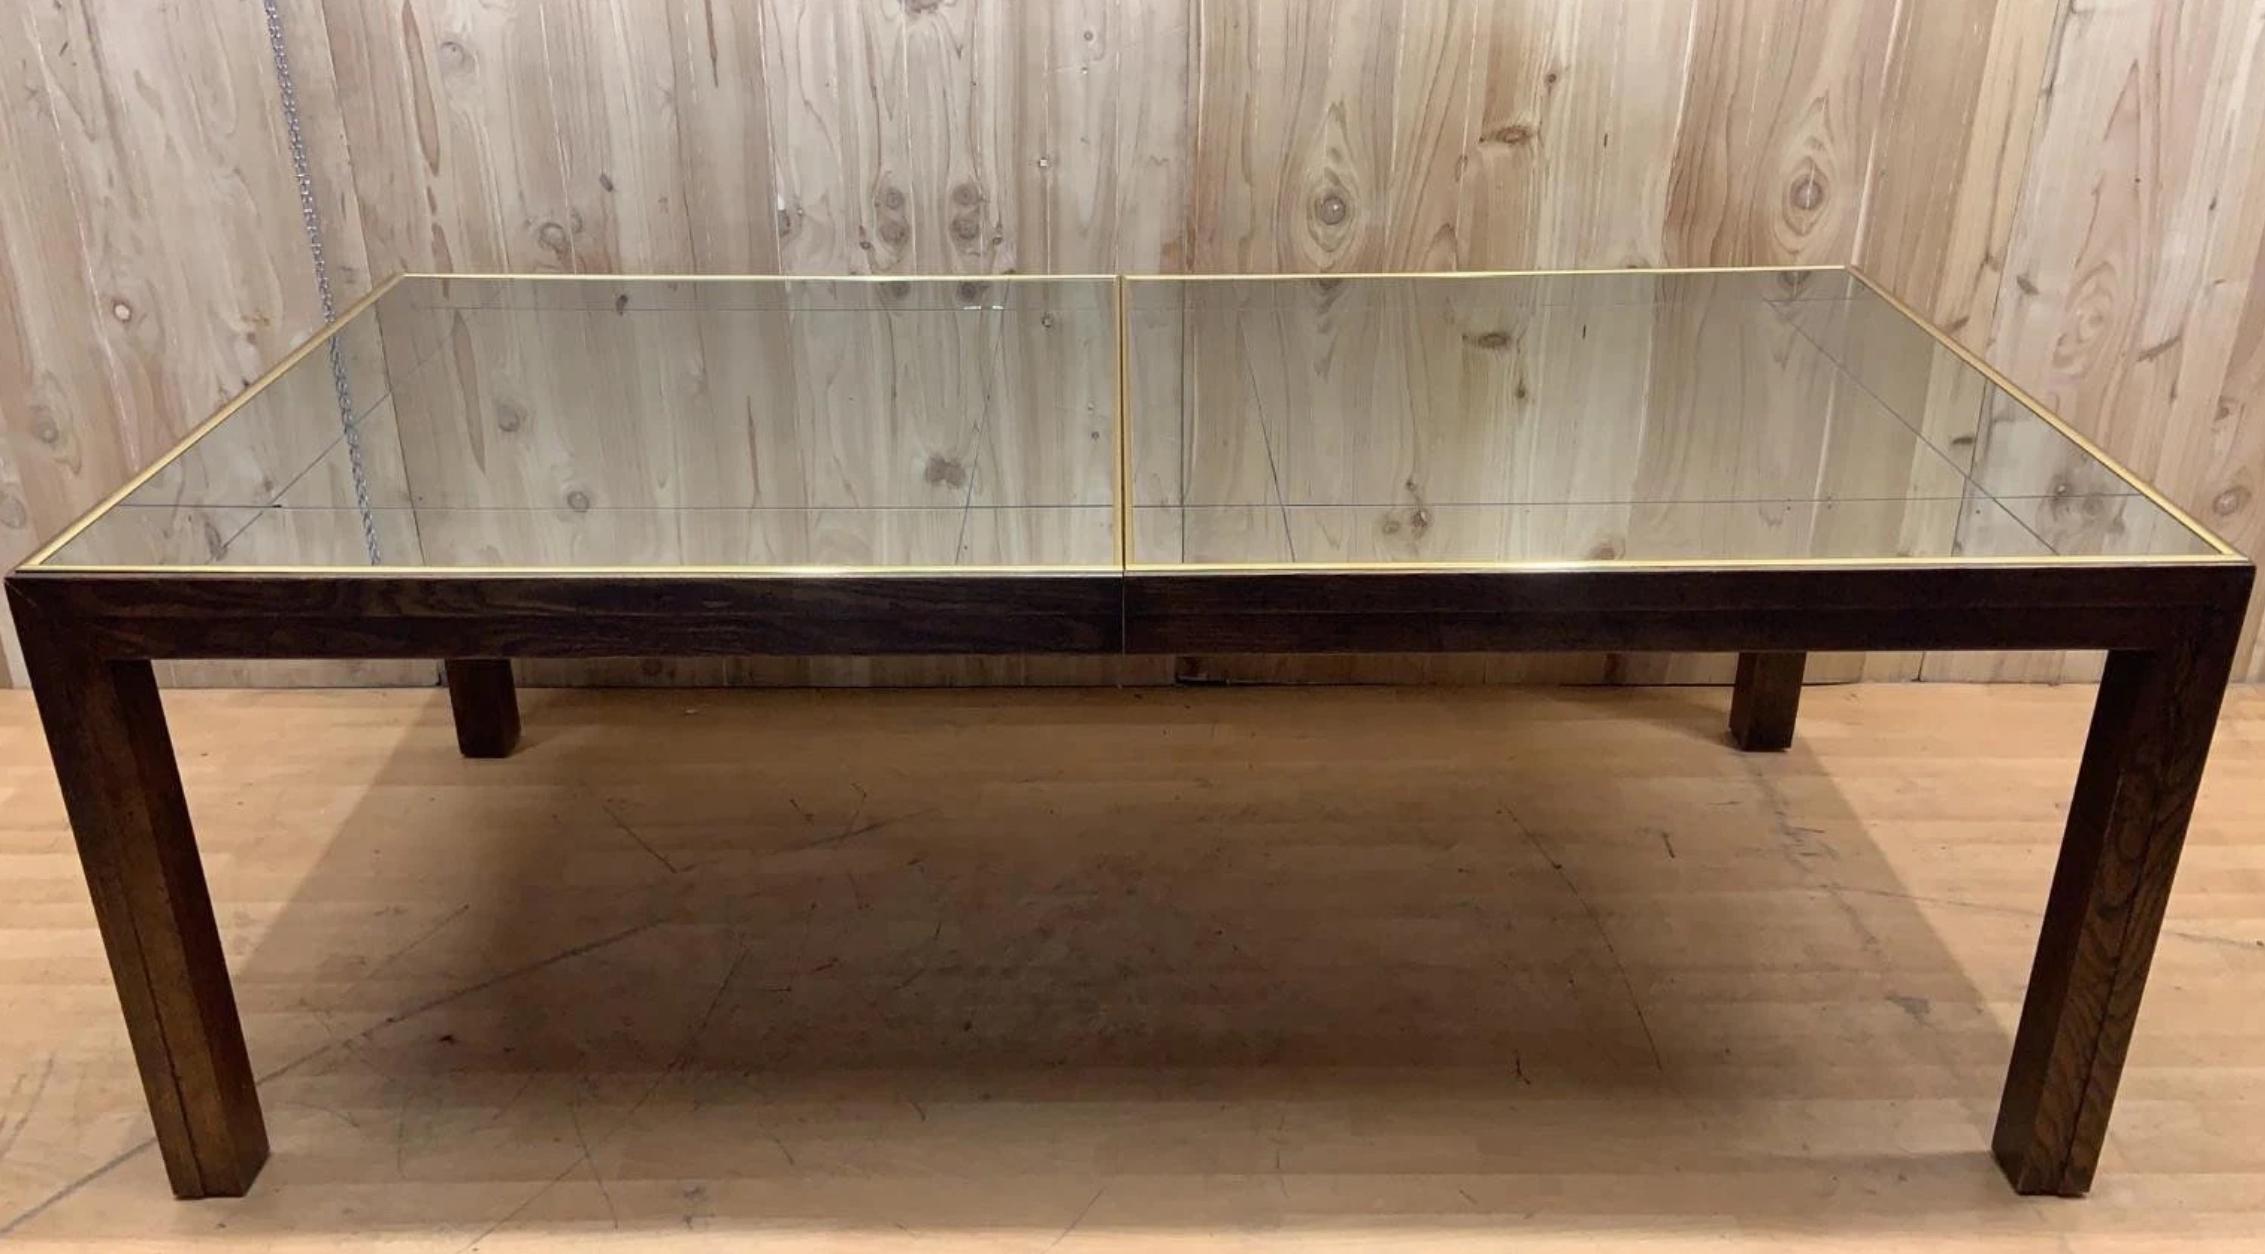 *** Shipping is NOT Free, please read below how to get a shipping quote. 

Vintage Mid Century Modern Brass Trim and Etched Smoked Mirror Extending Parsons Dining Table with 2 Leaves by Henredon

The Vintage Mid Century Modern Brass Trim and Etched